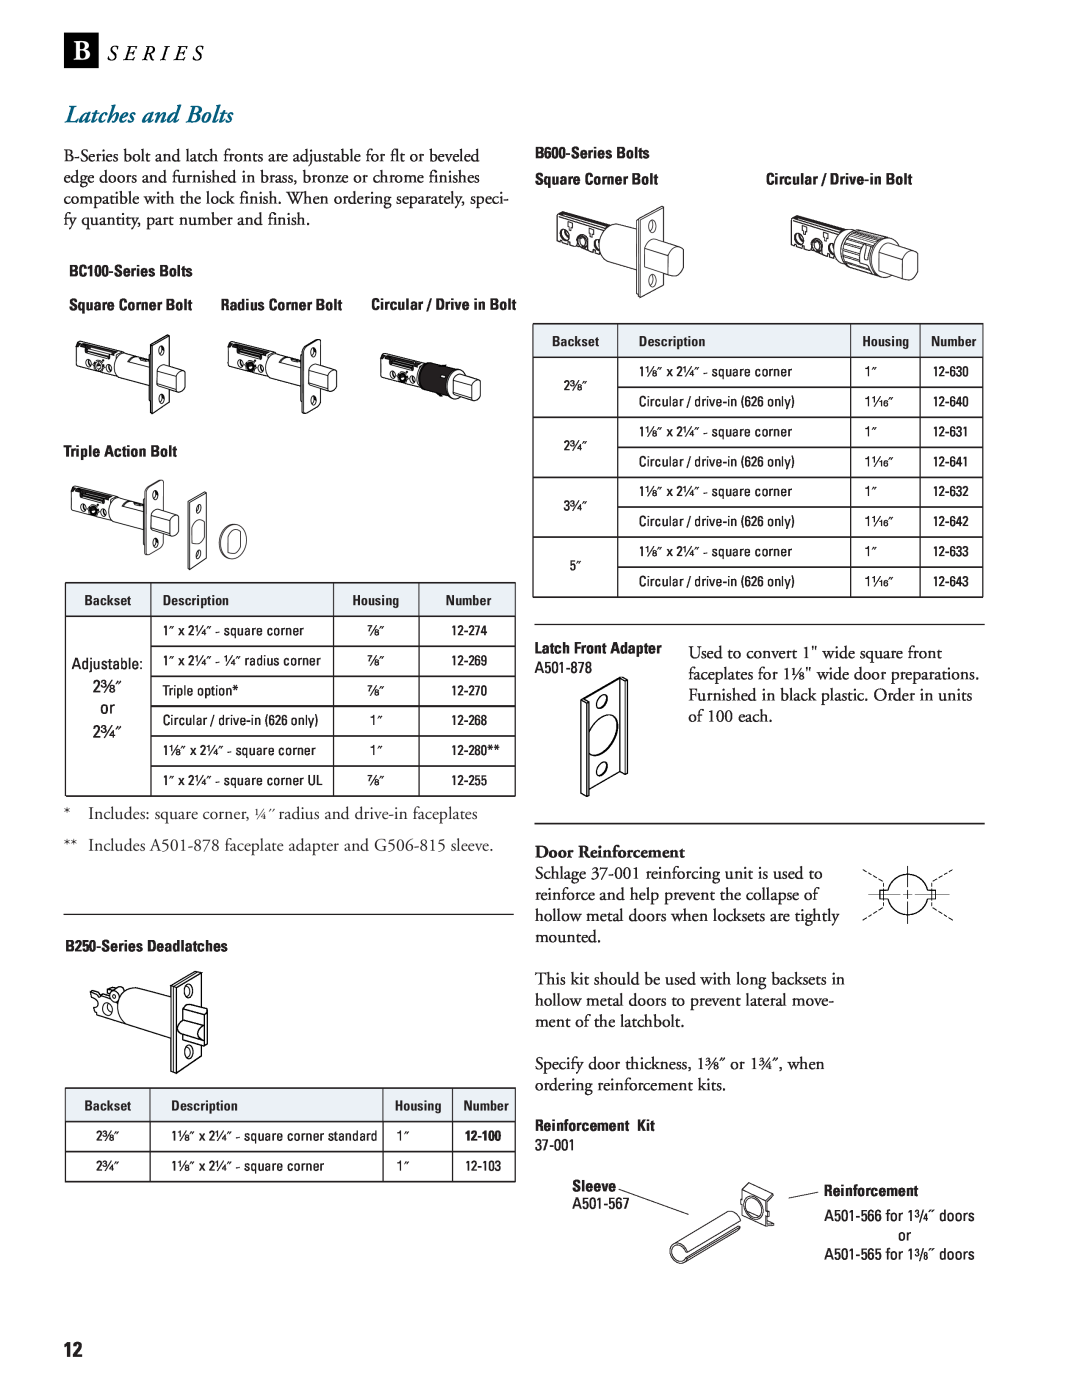 Schlage B-Series manual Latches and Bolts, B S E R I E S, Door Reinforcement 